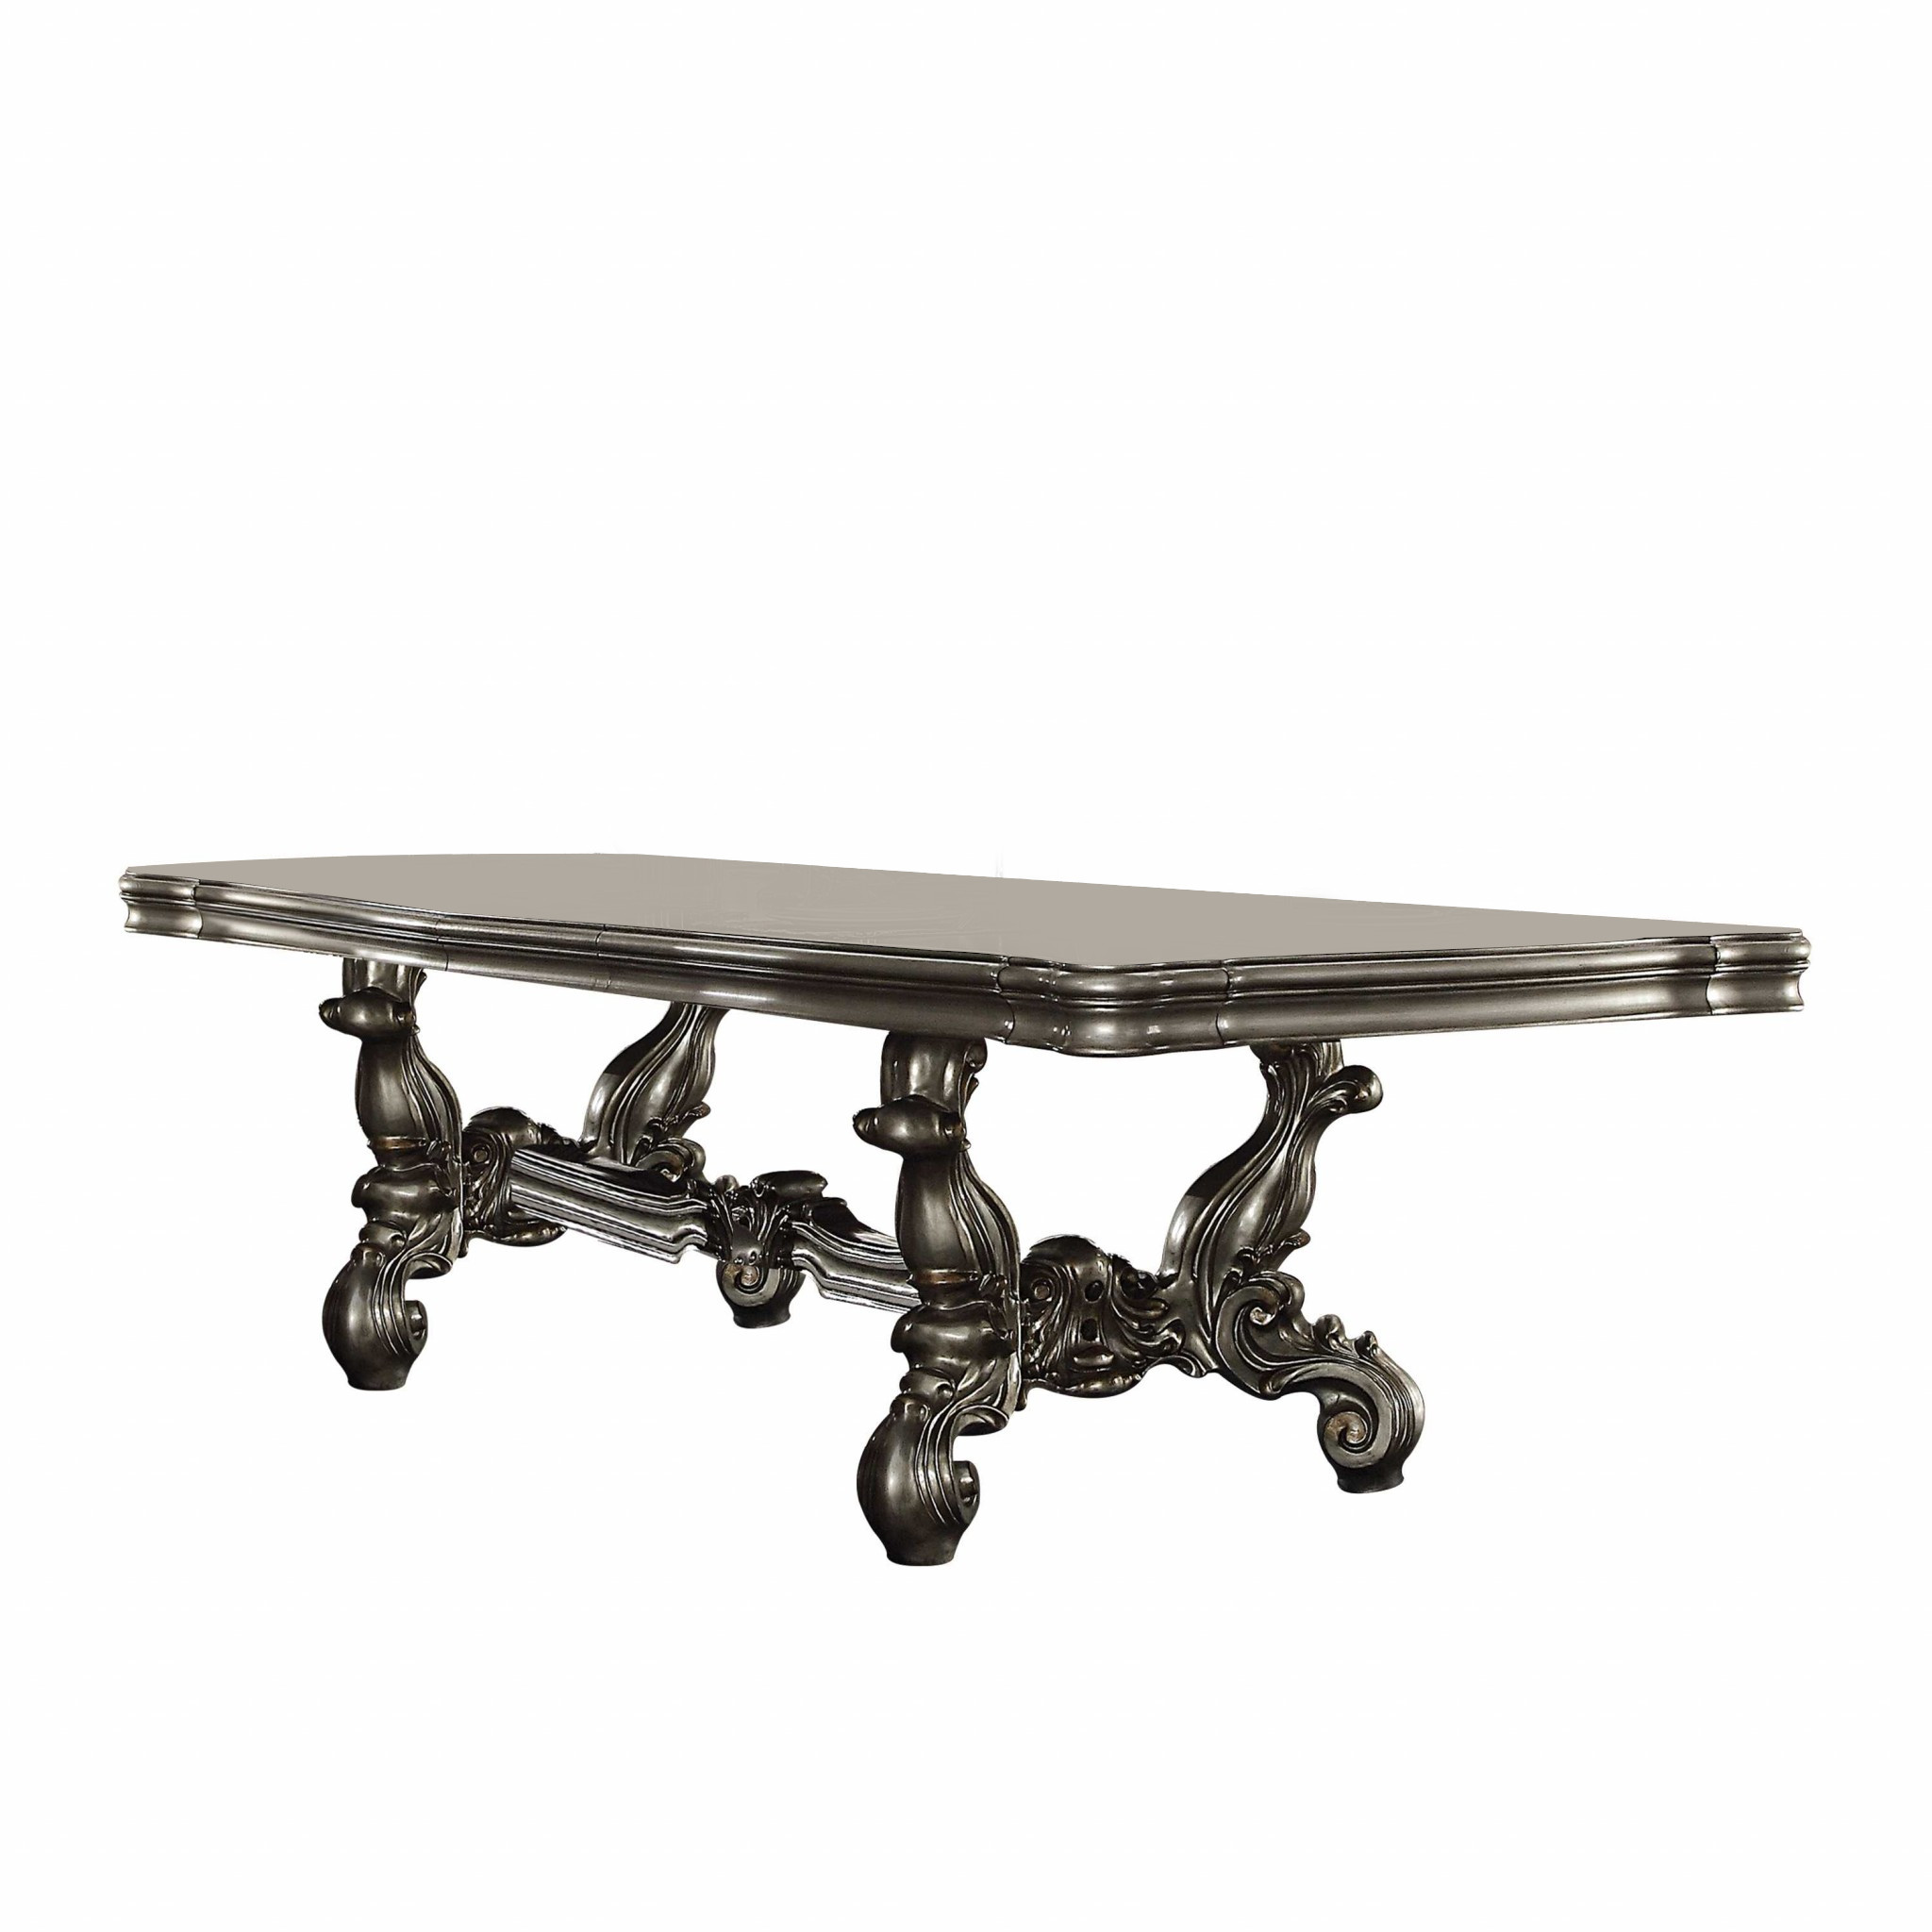 46" Platinum Solid Wood Dining Table-348652-1